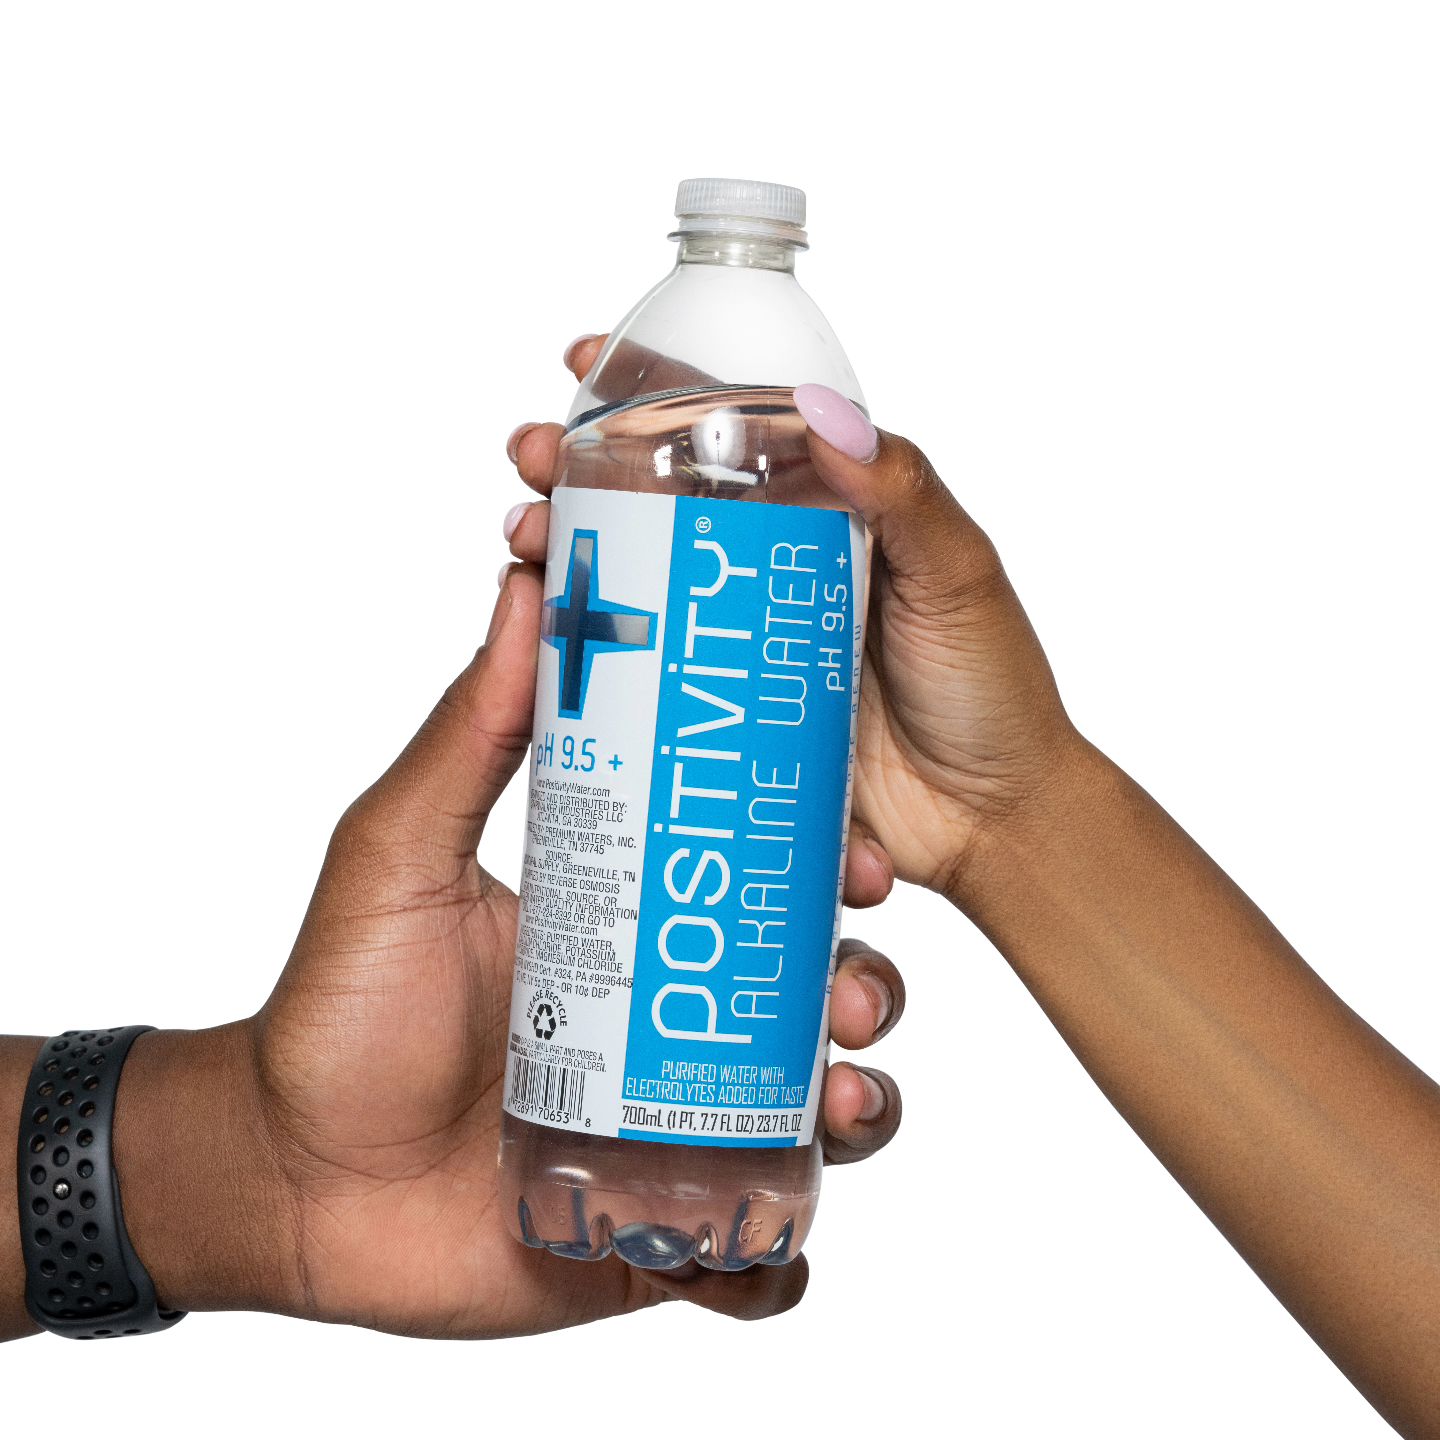 Two people passing a bottle of Positivity alkaline water to each other